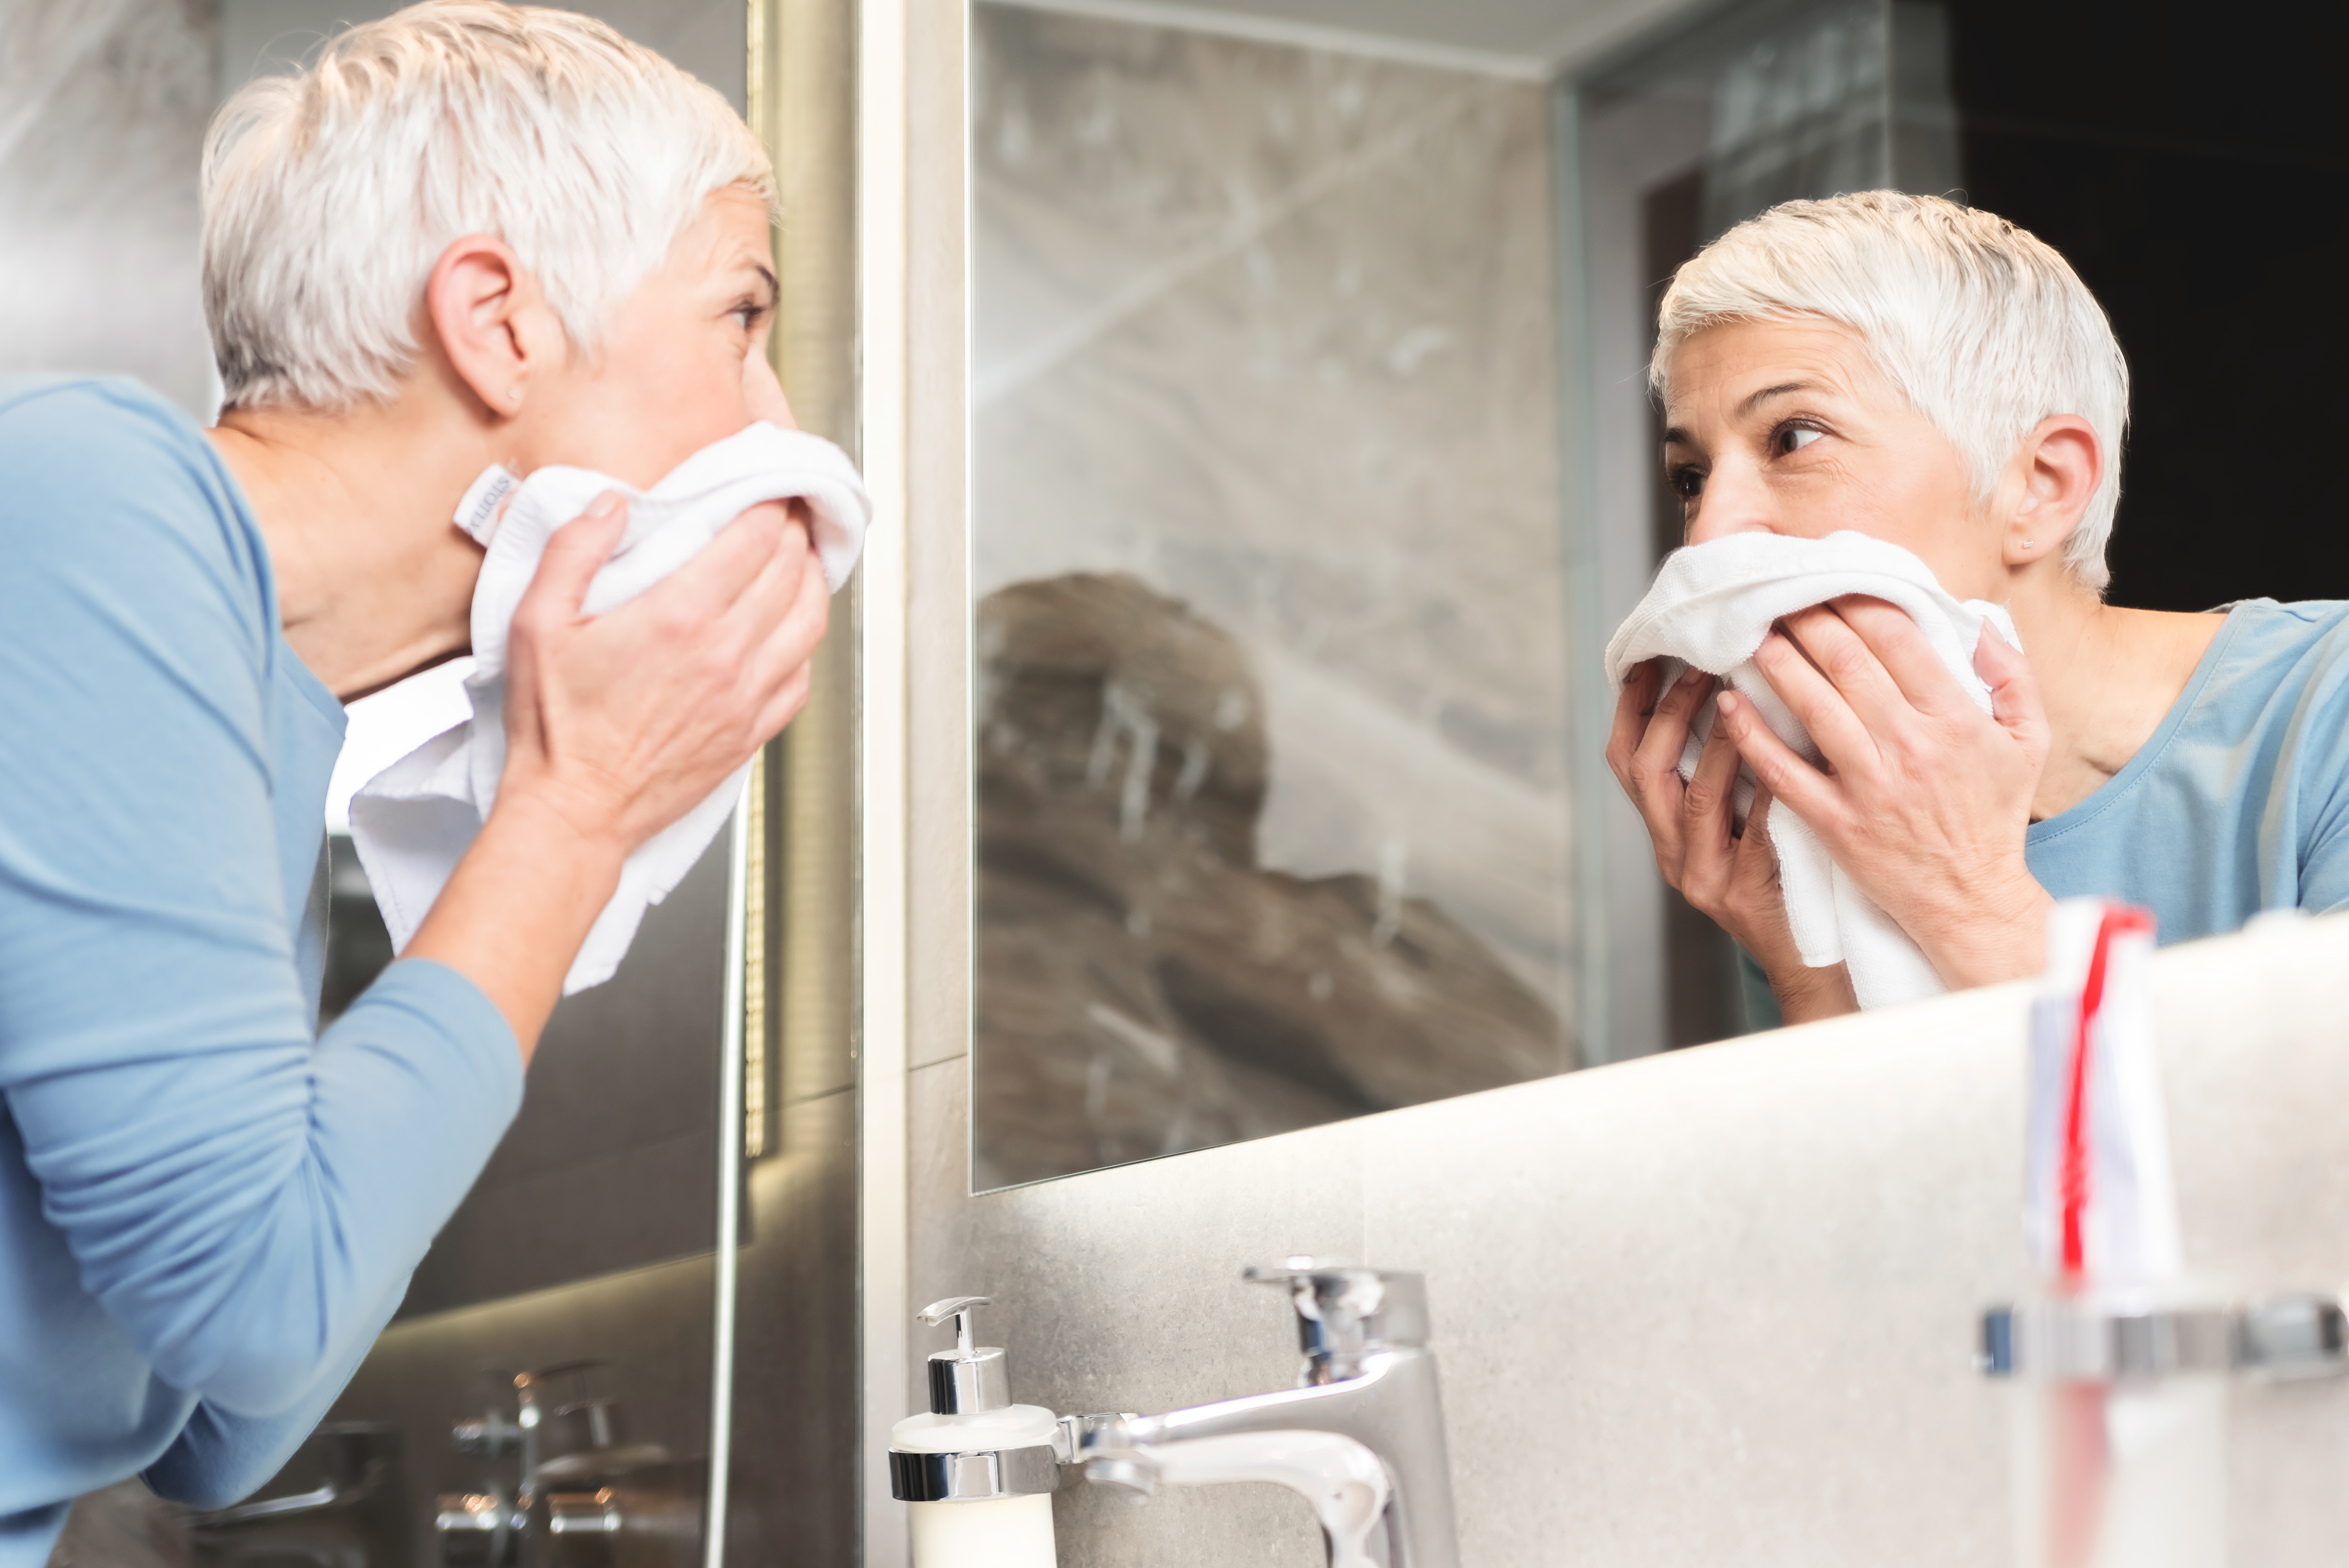 Woman with short, grey hair washing her face | Source: Shutterstock